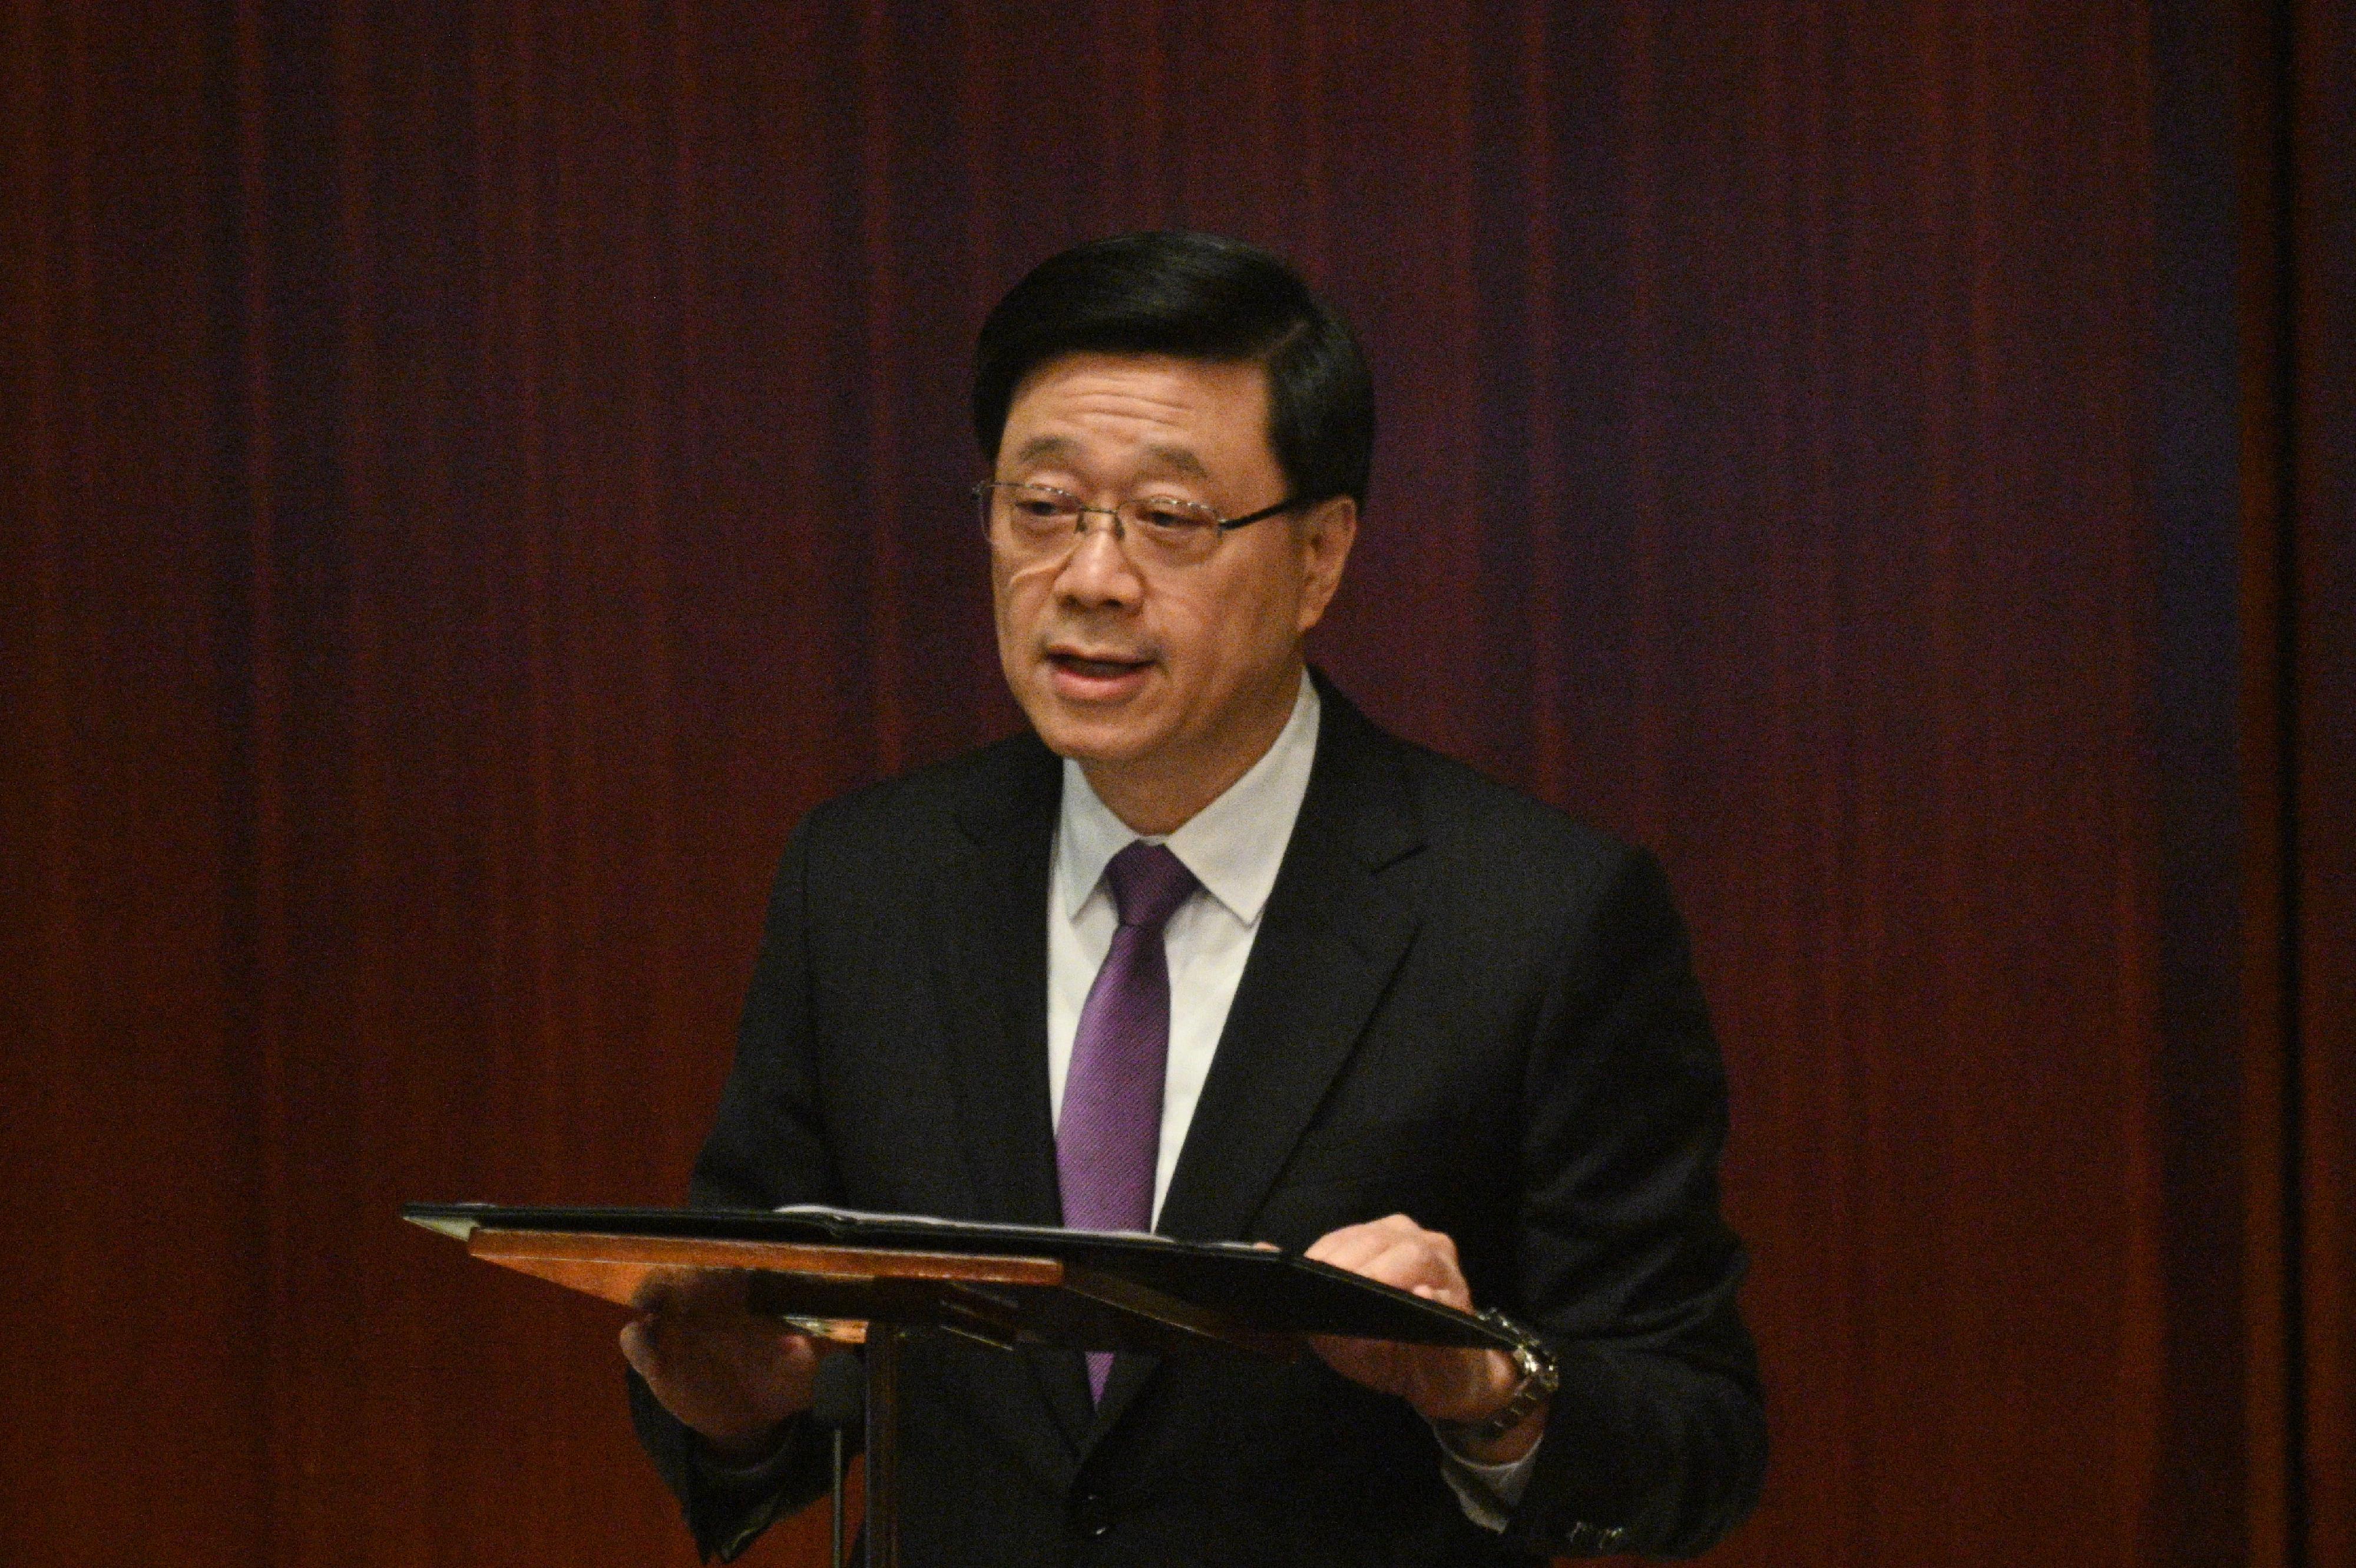 The Chief Executive, Mr John Lee, addresses at the Legislative Council (LegCo) meeting on the LegCo's passage of the Safeguarding National Security Bill today (March 19).